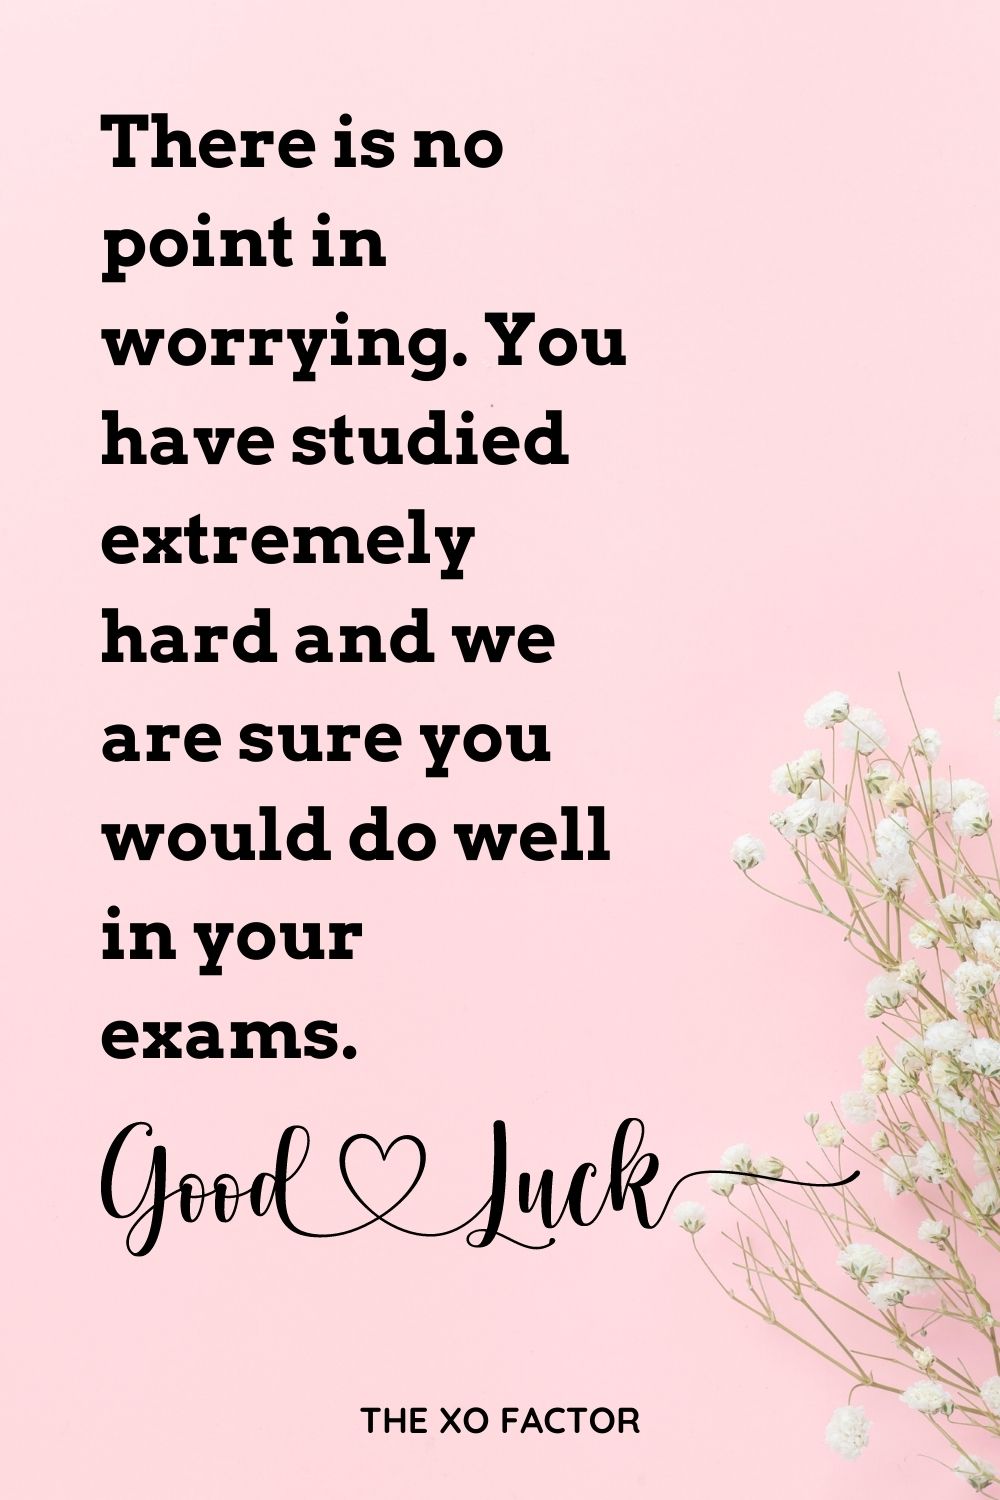 There is no point in worrying. You have studied extremely hard and we are sure you would do well in your exams. Good luck!